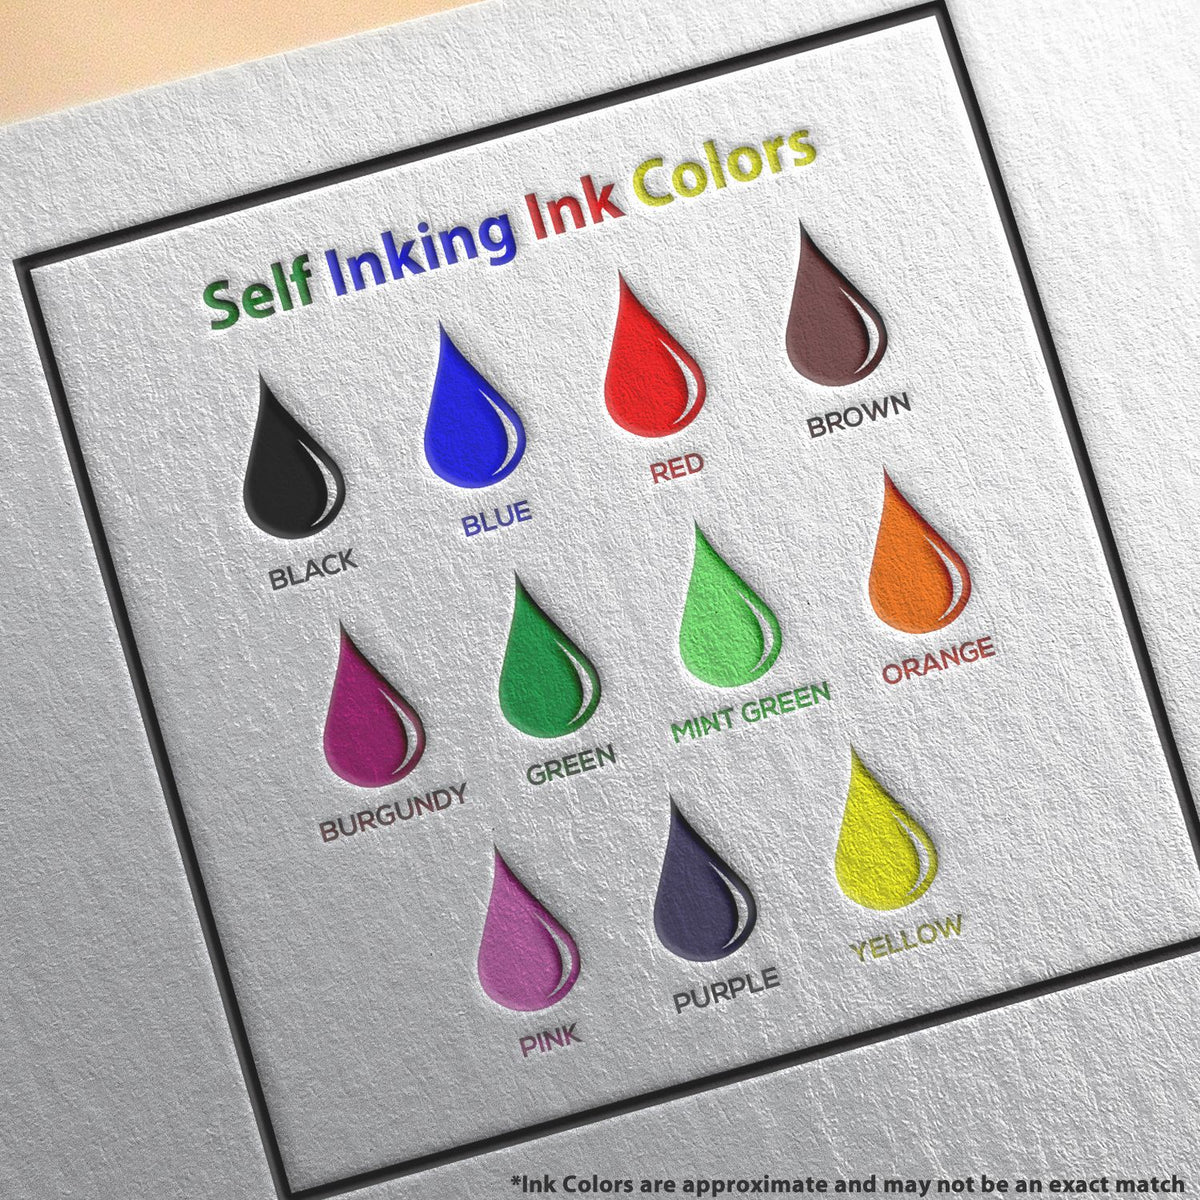 A picture showing the different ink colors or hues available for the Self-Inking Guam Landscape Architect Stamp product.